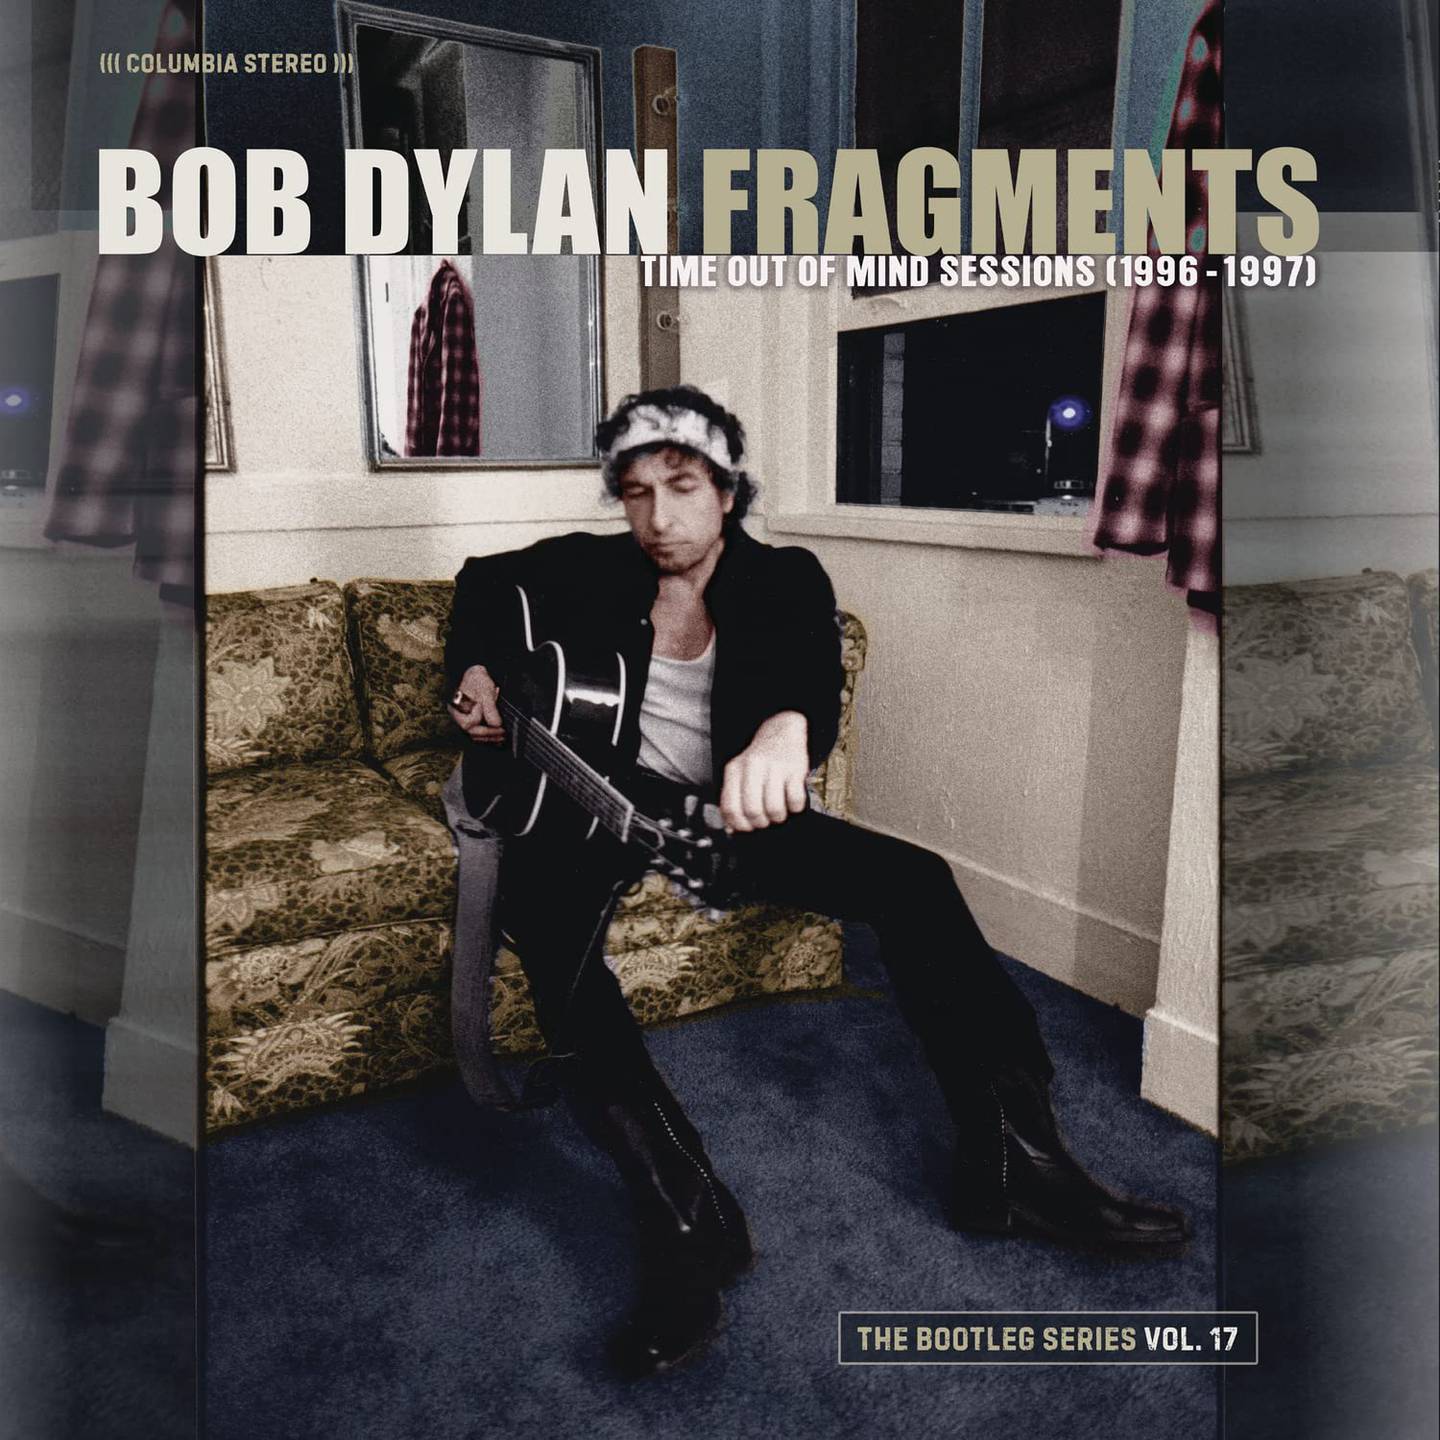 Bob Dylan: Fragments - Time Out Of Mind Sessions (Bootleg Series vol. 17)